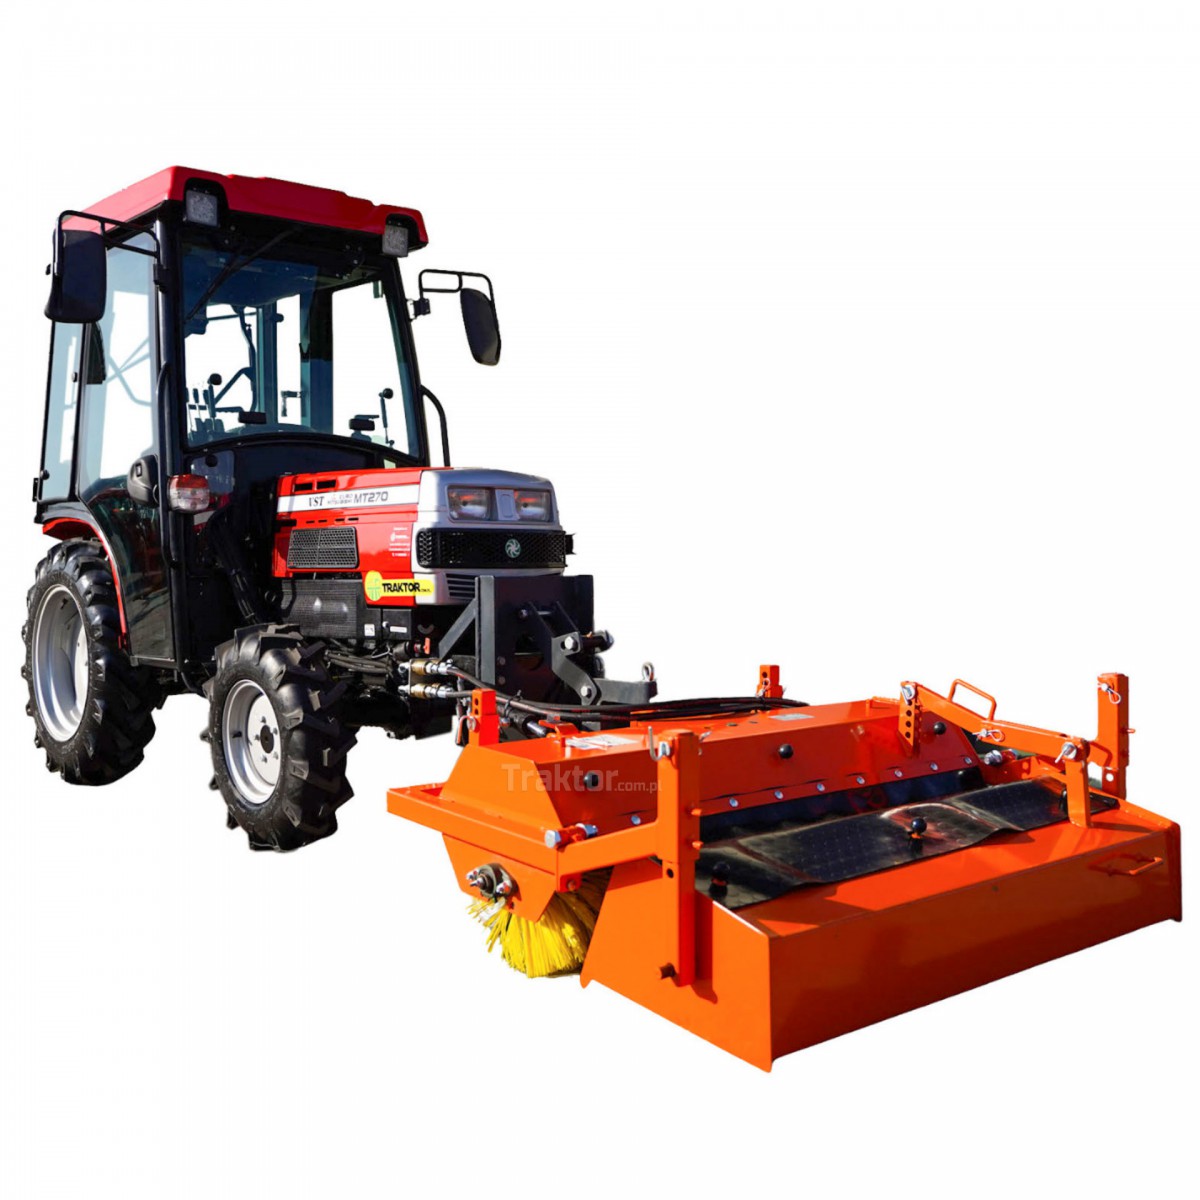 VST MT270 4x4 - 27KM / CAB + 120 cm sweeper for Sanko tractor with basket